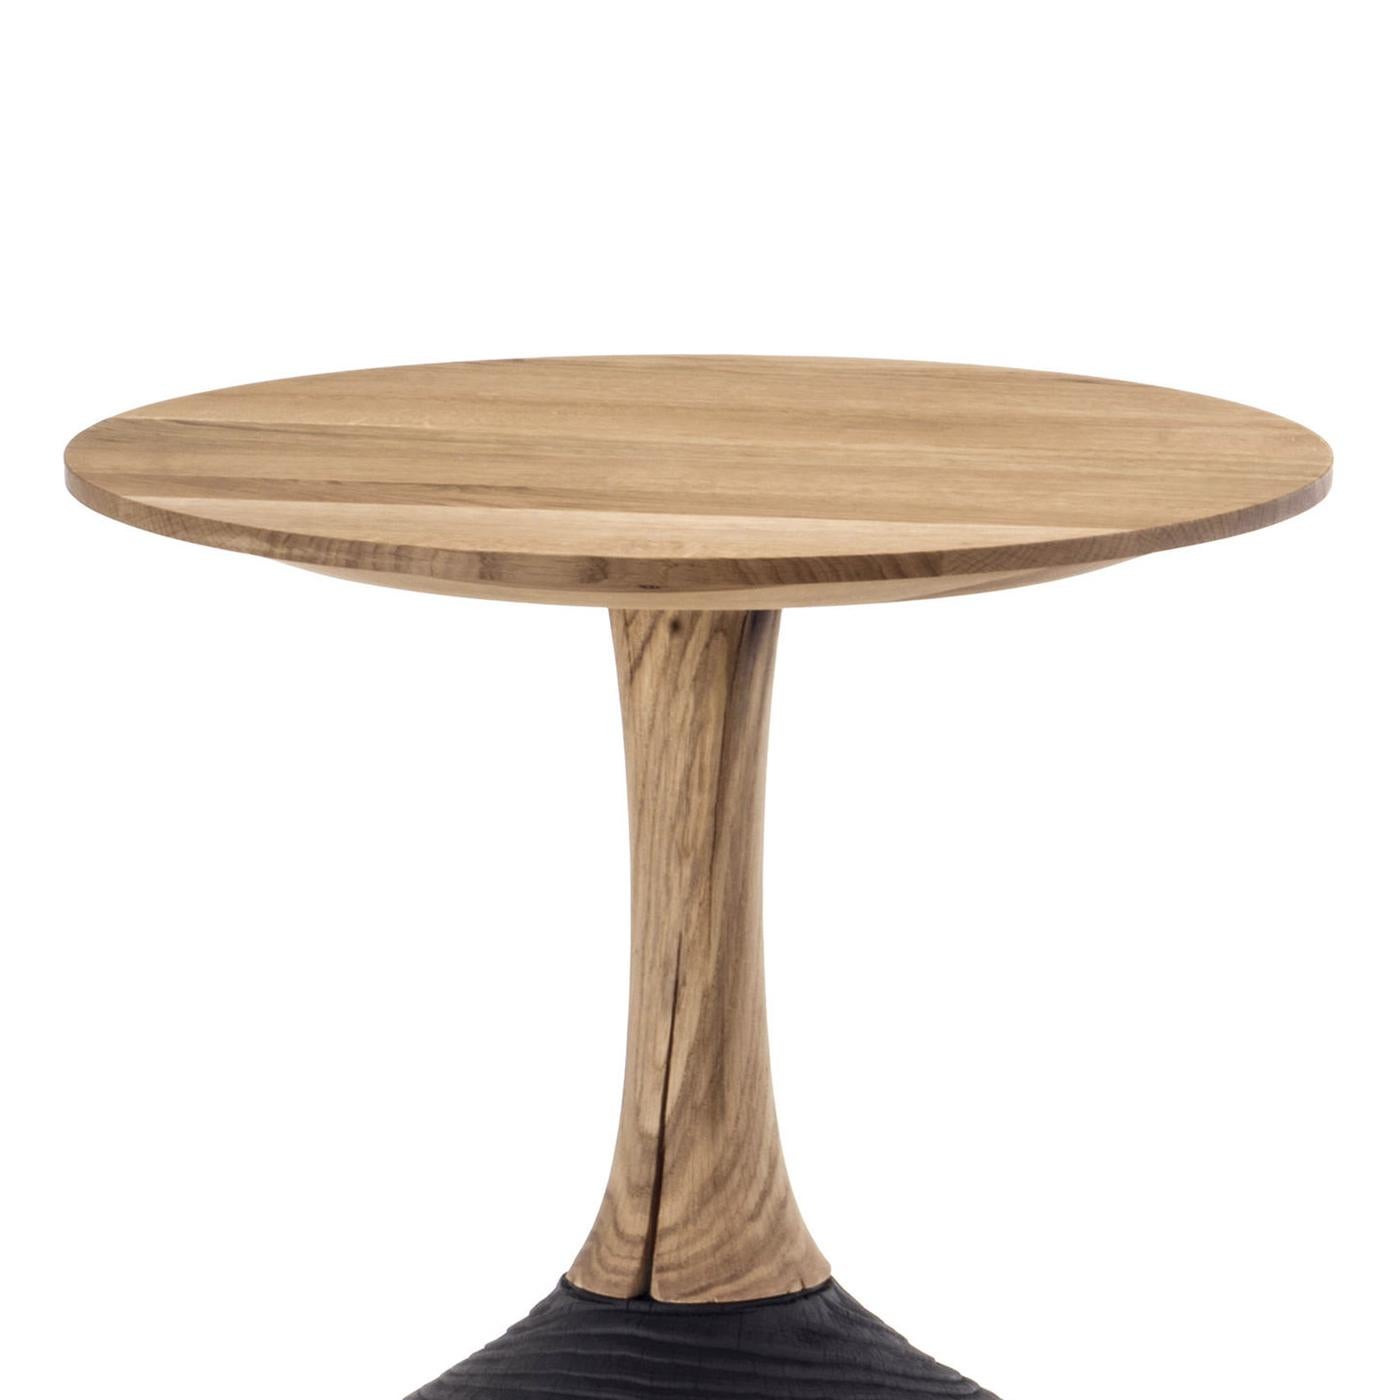 Side table ennio medium round all in solid. 
Oak wood and with burnt oak wood base.